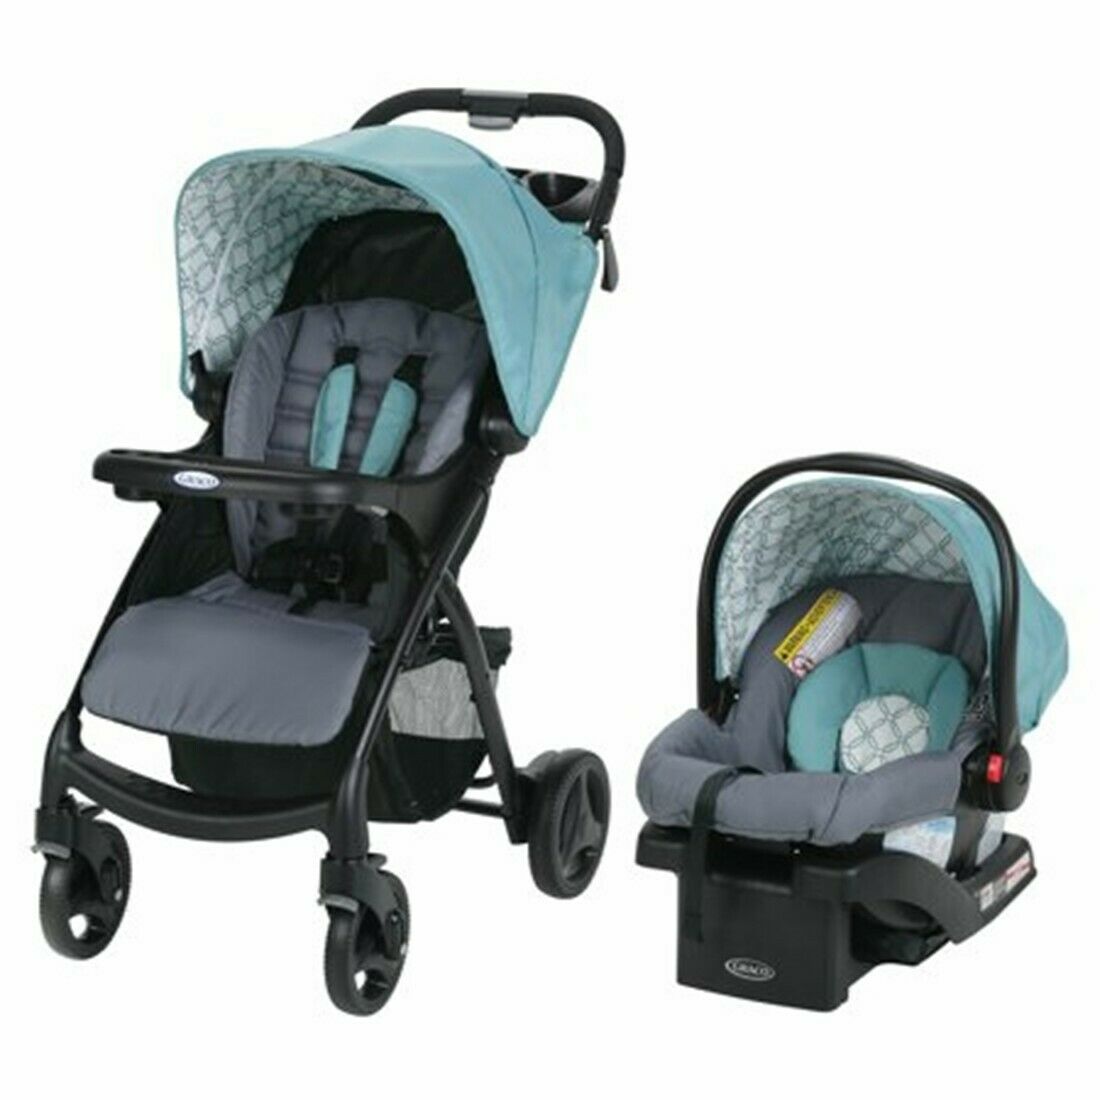 Baby Stroller with Car Seat Travel System Infant Toddler Bassinet Playard Combo